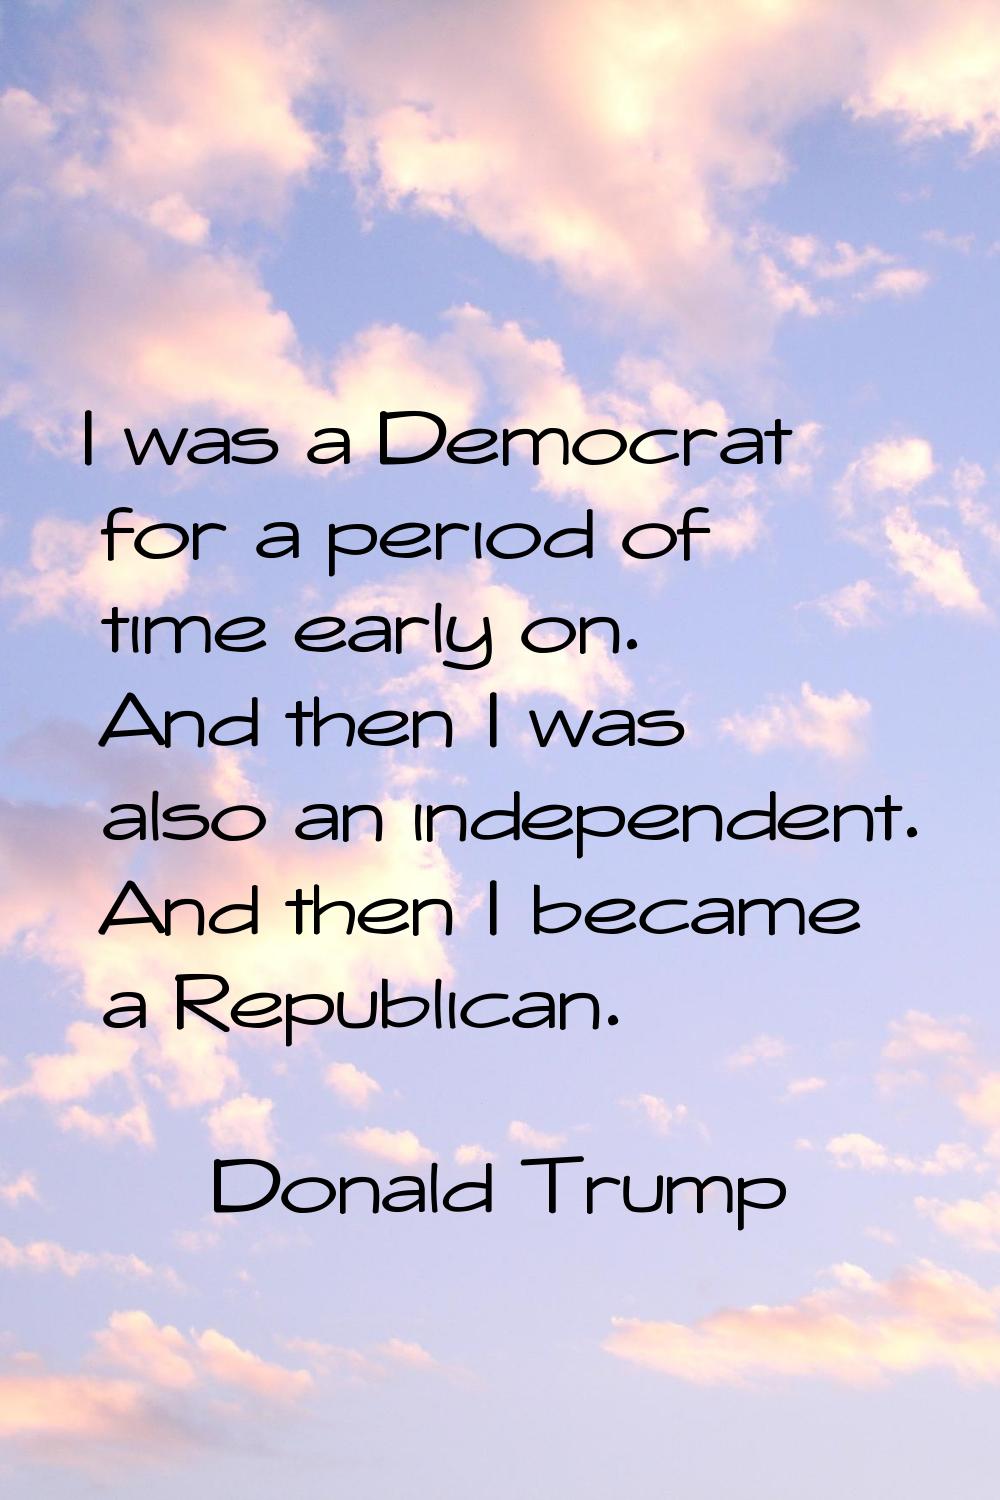 I was a Democrat for a period of time early on. And then I was also an independent. And then I beca